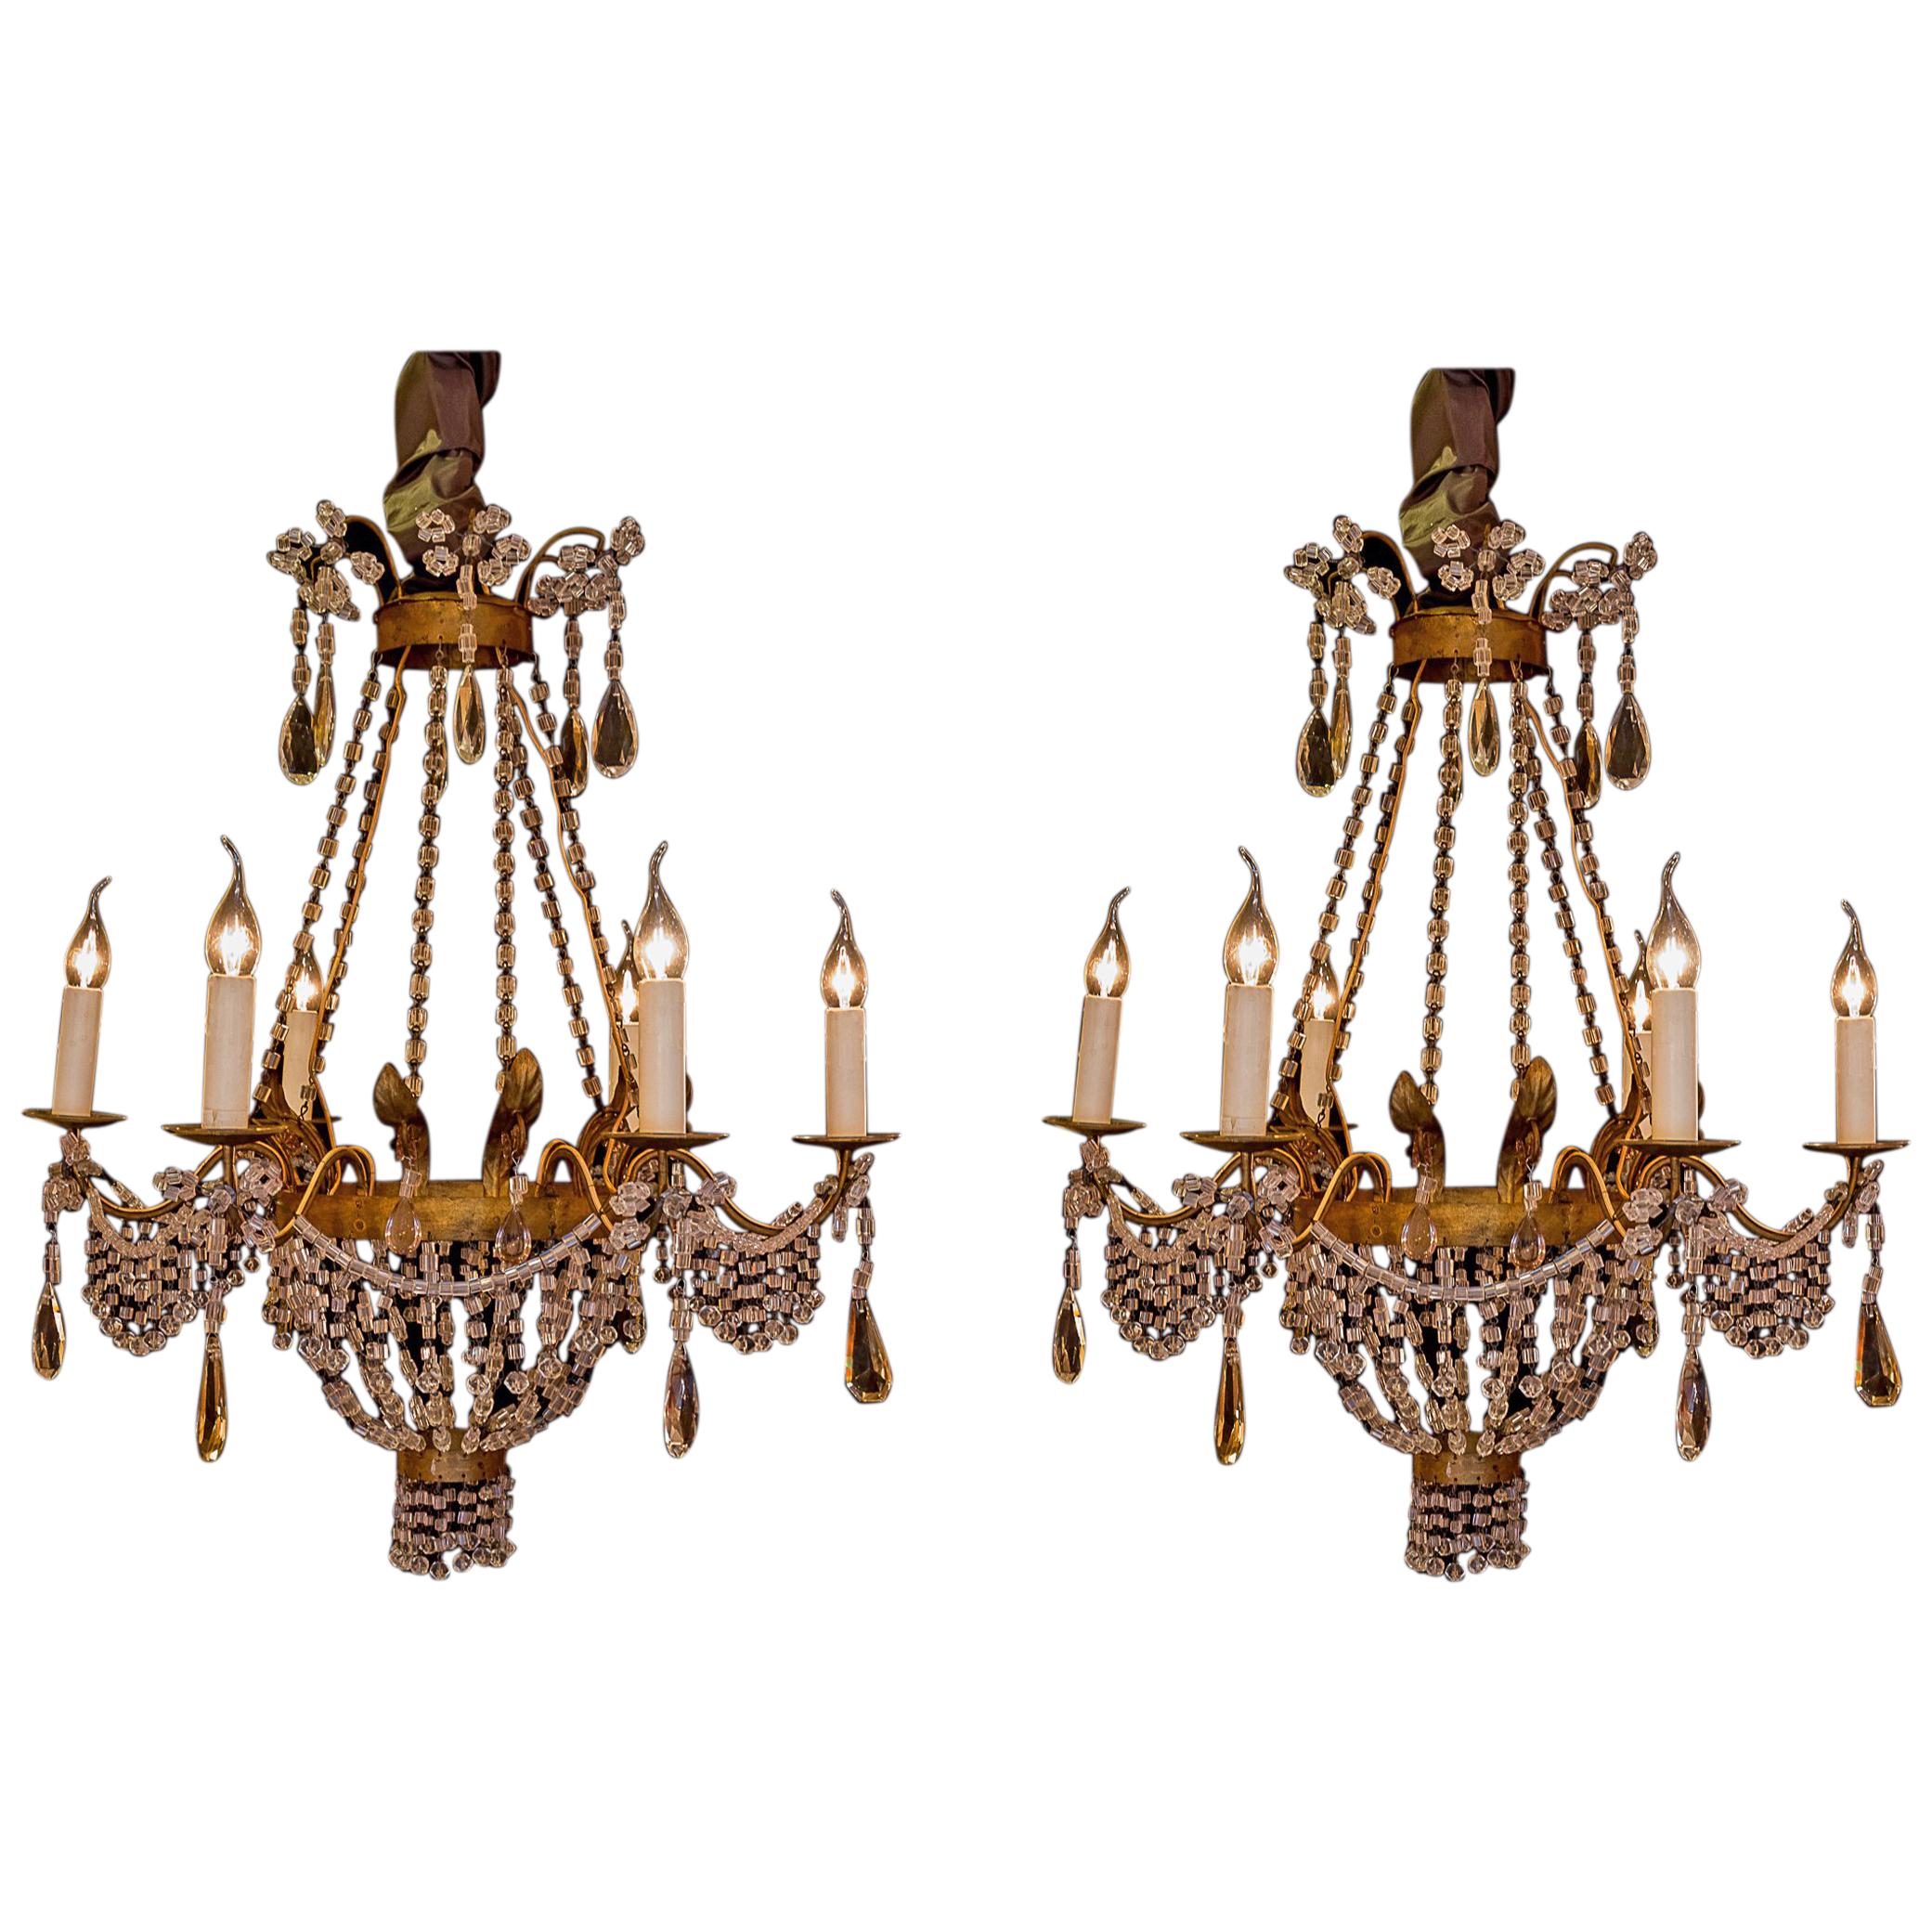 Pair of Small Chandeliers, Brass and Handcut Crystal, 19th Century